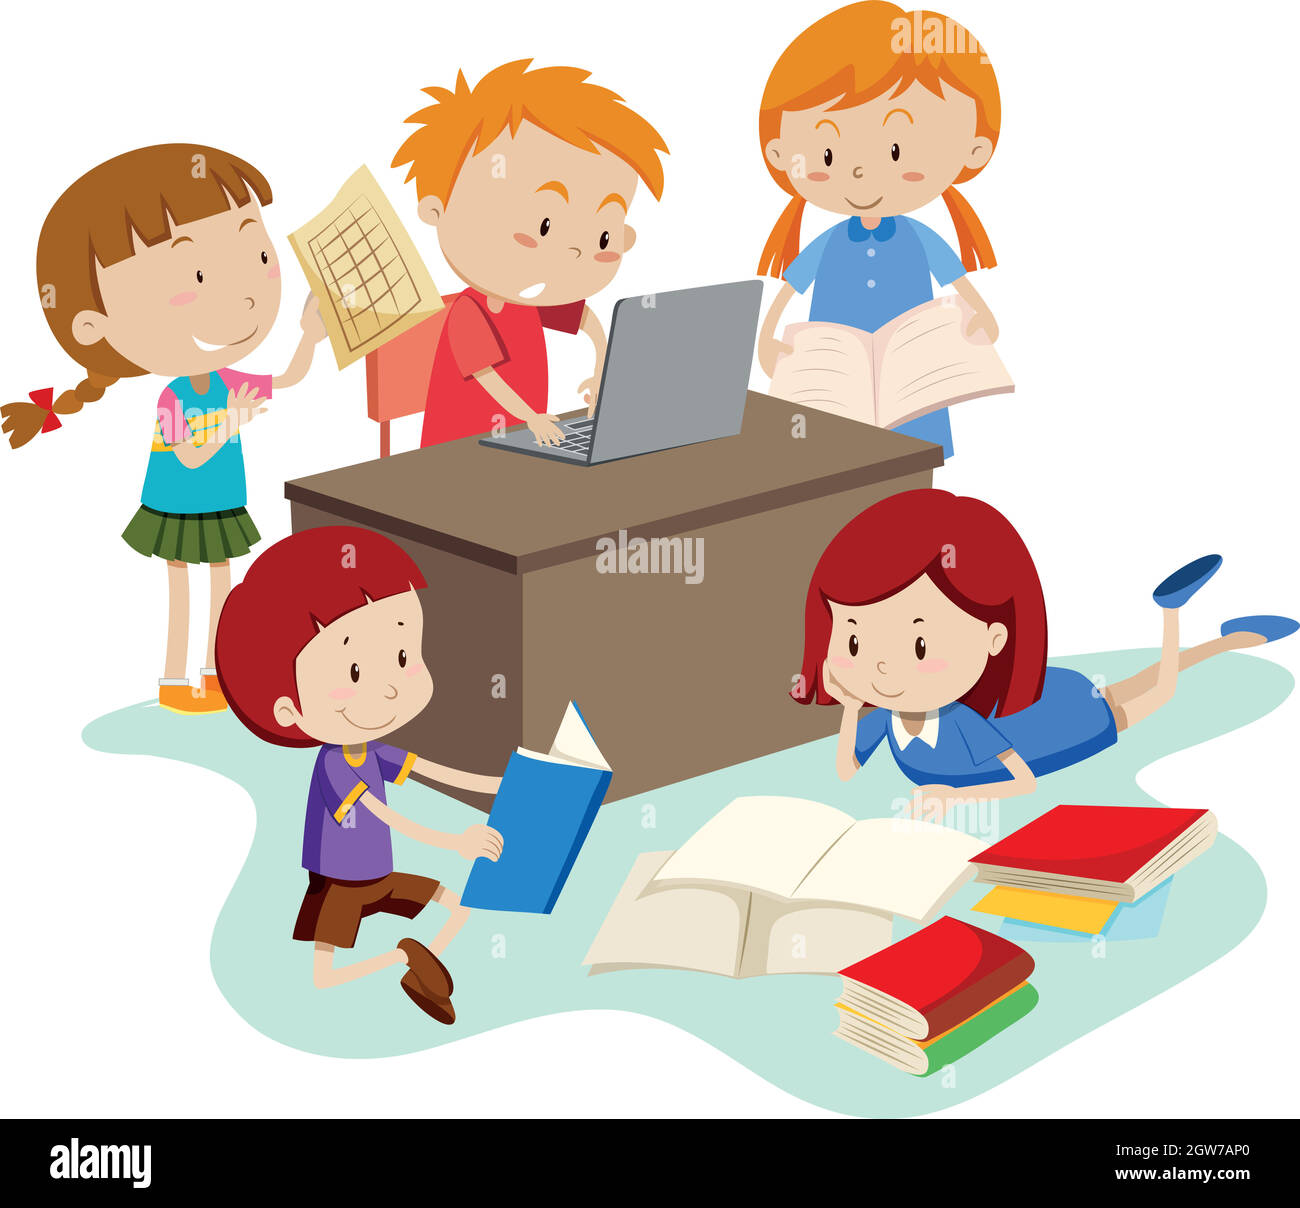 Student Study in Class Room Stock Vector